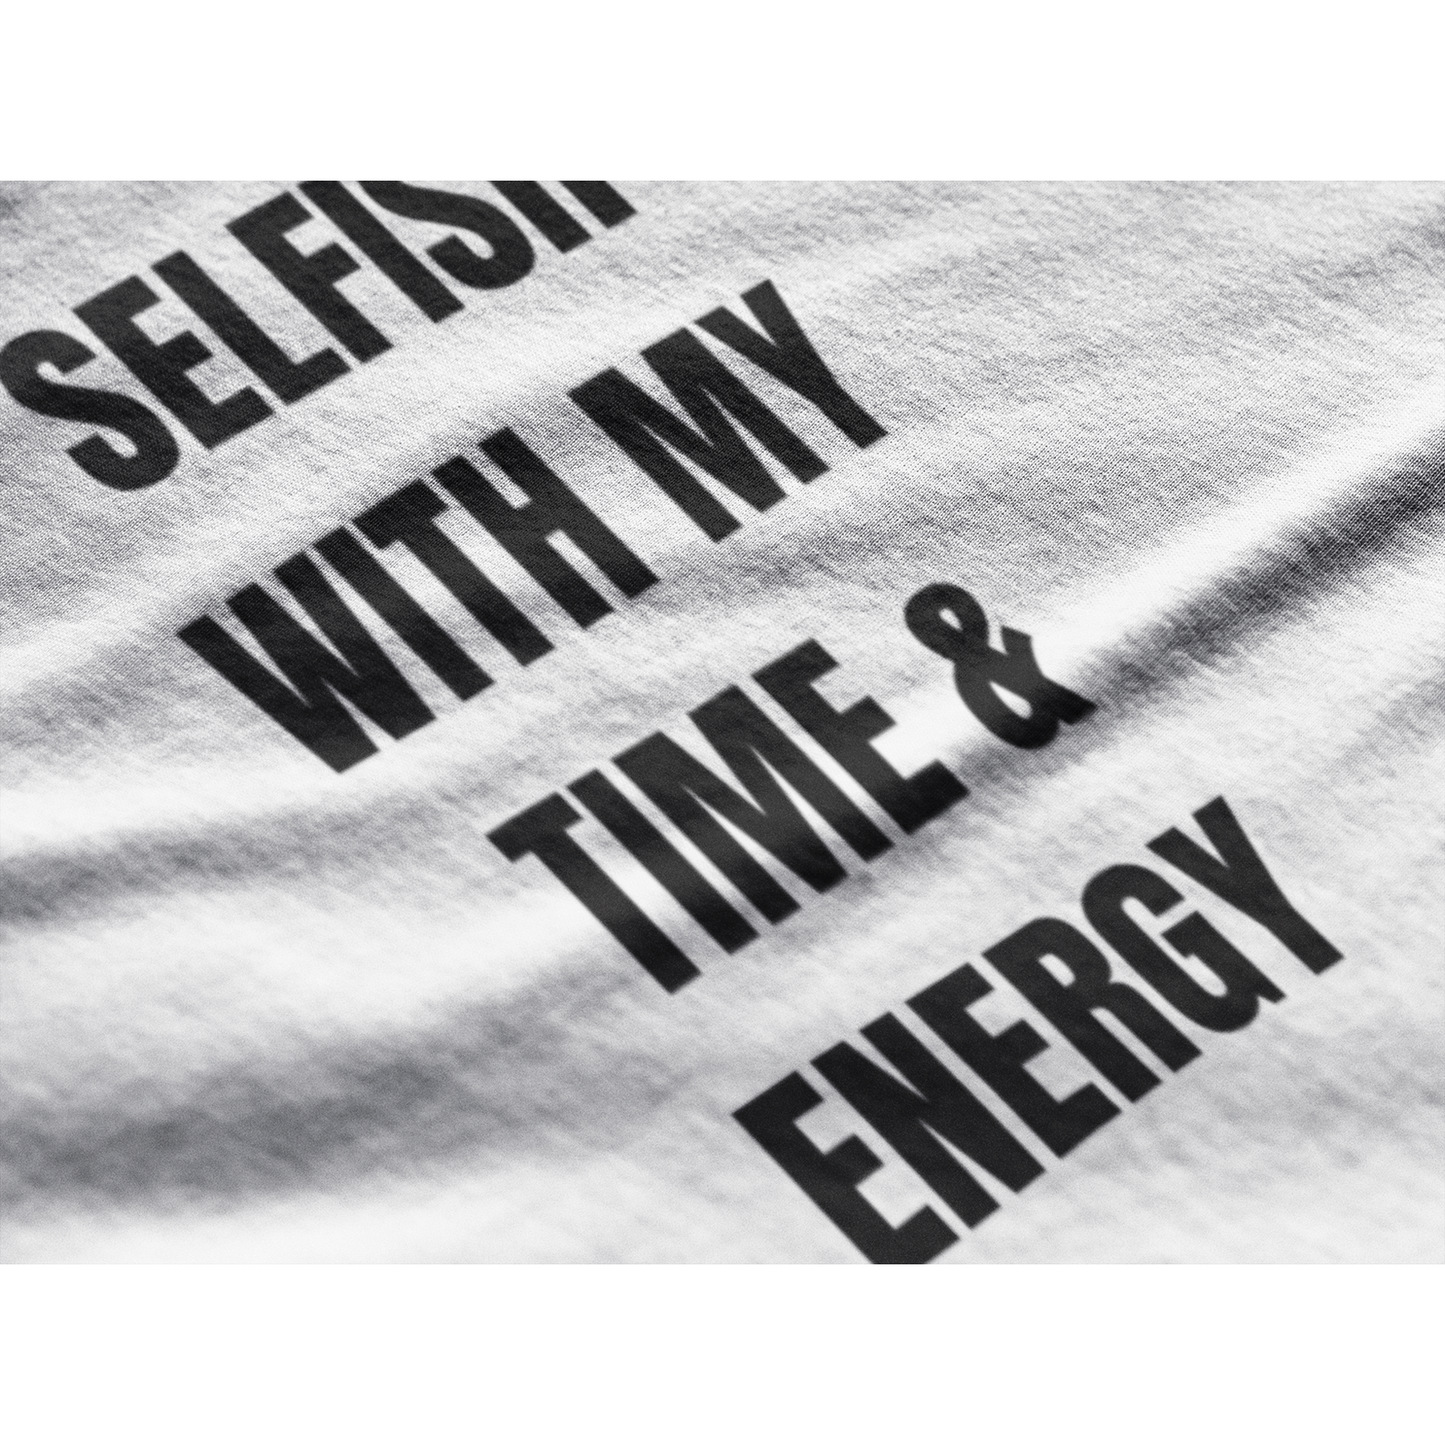 Selfish With My Time & Energy | T-Shirt - Eb Creations Selfish With My Time & Energy | T-Shirt